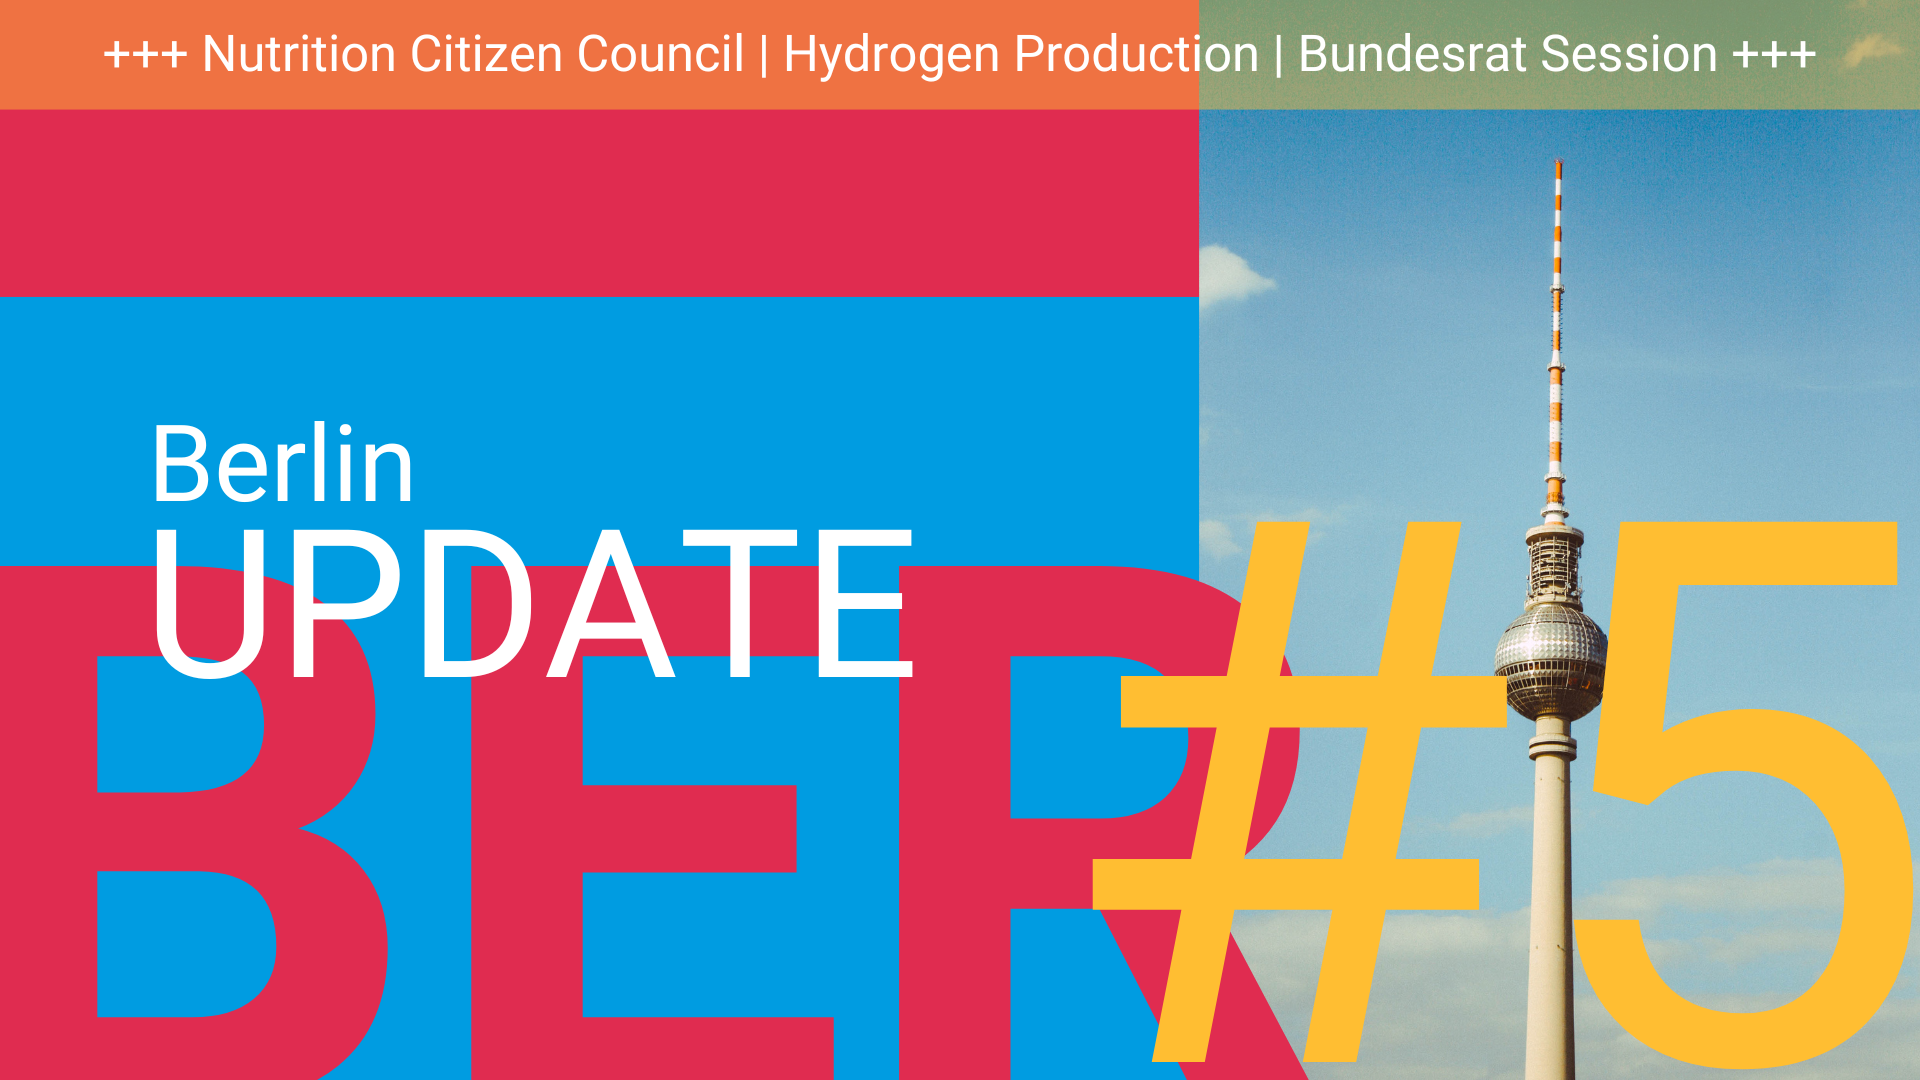 Update from Berlin #5 | Nutrition Citizen Council, Hydrogen Production, Bundestag Session